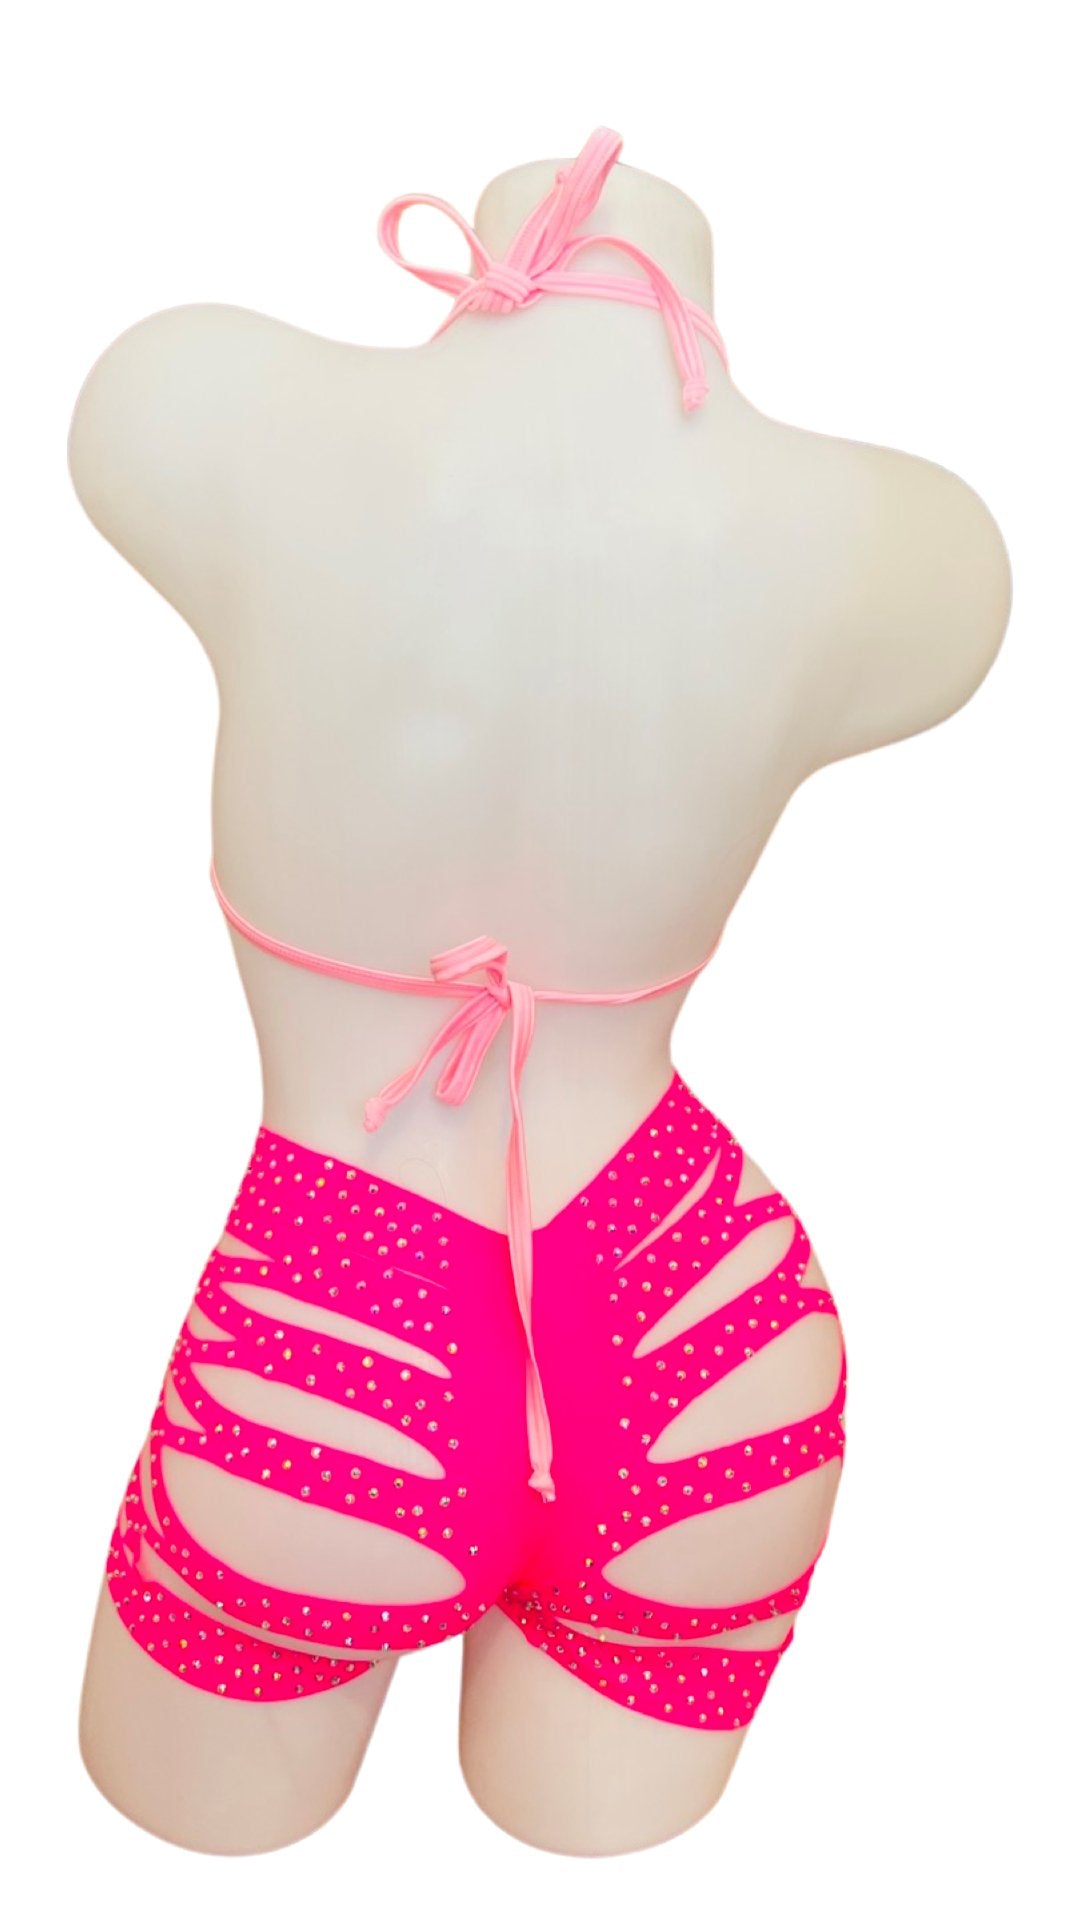 Rhinestone Triangle Top and Cut Out Short Set Baby Pink/Hot Pink - Model Express VancouverBikini